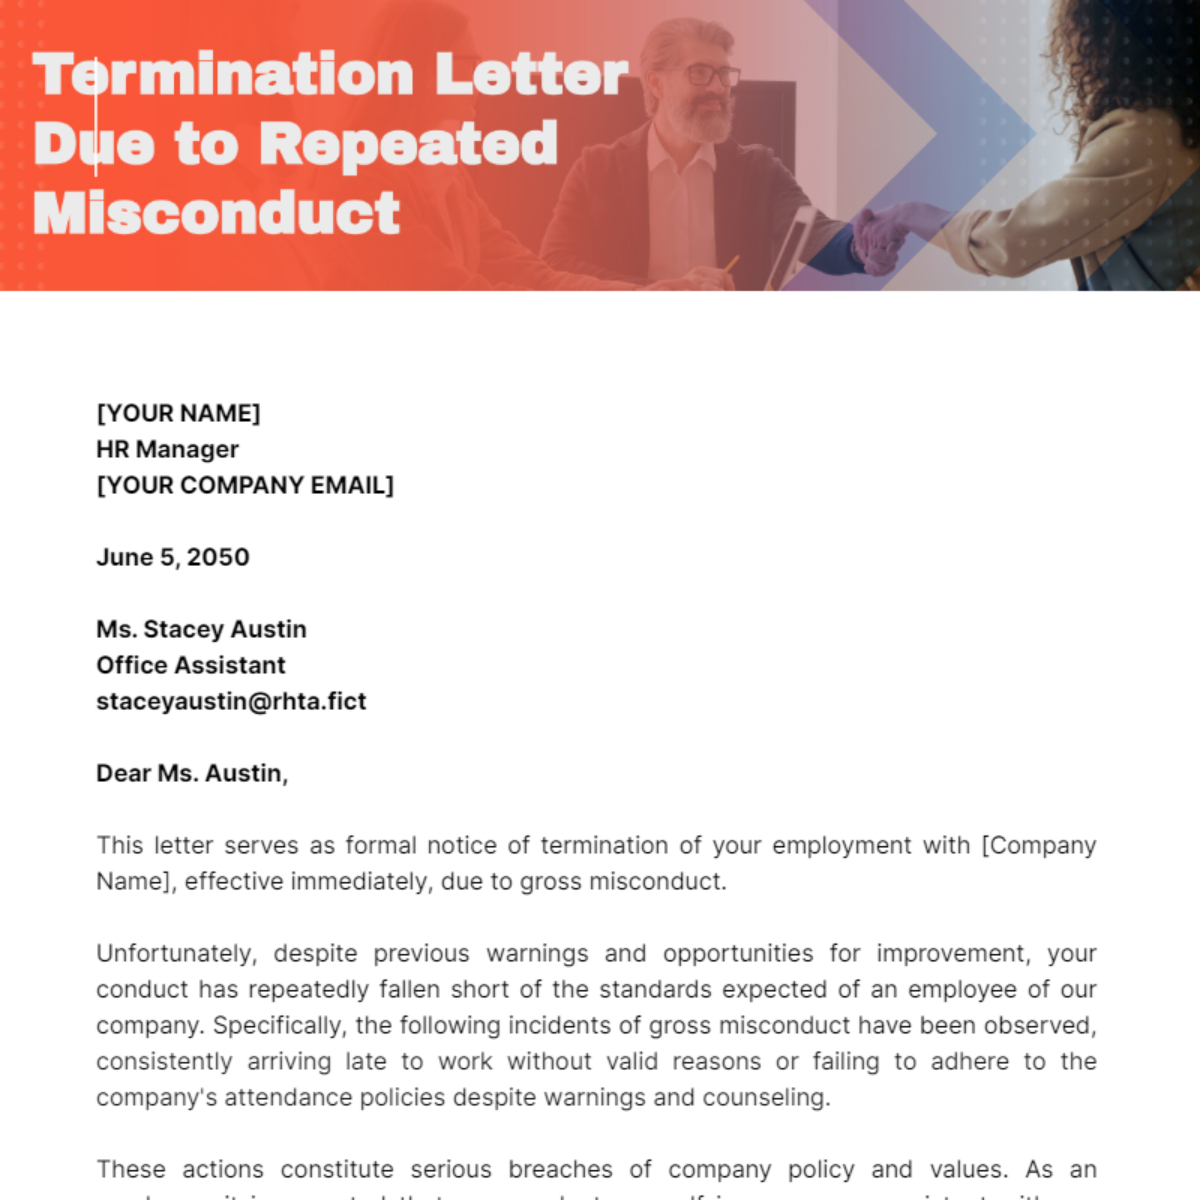 Termination Letter Template Due to Gross Misconduct